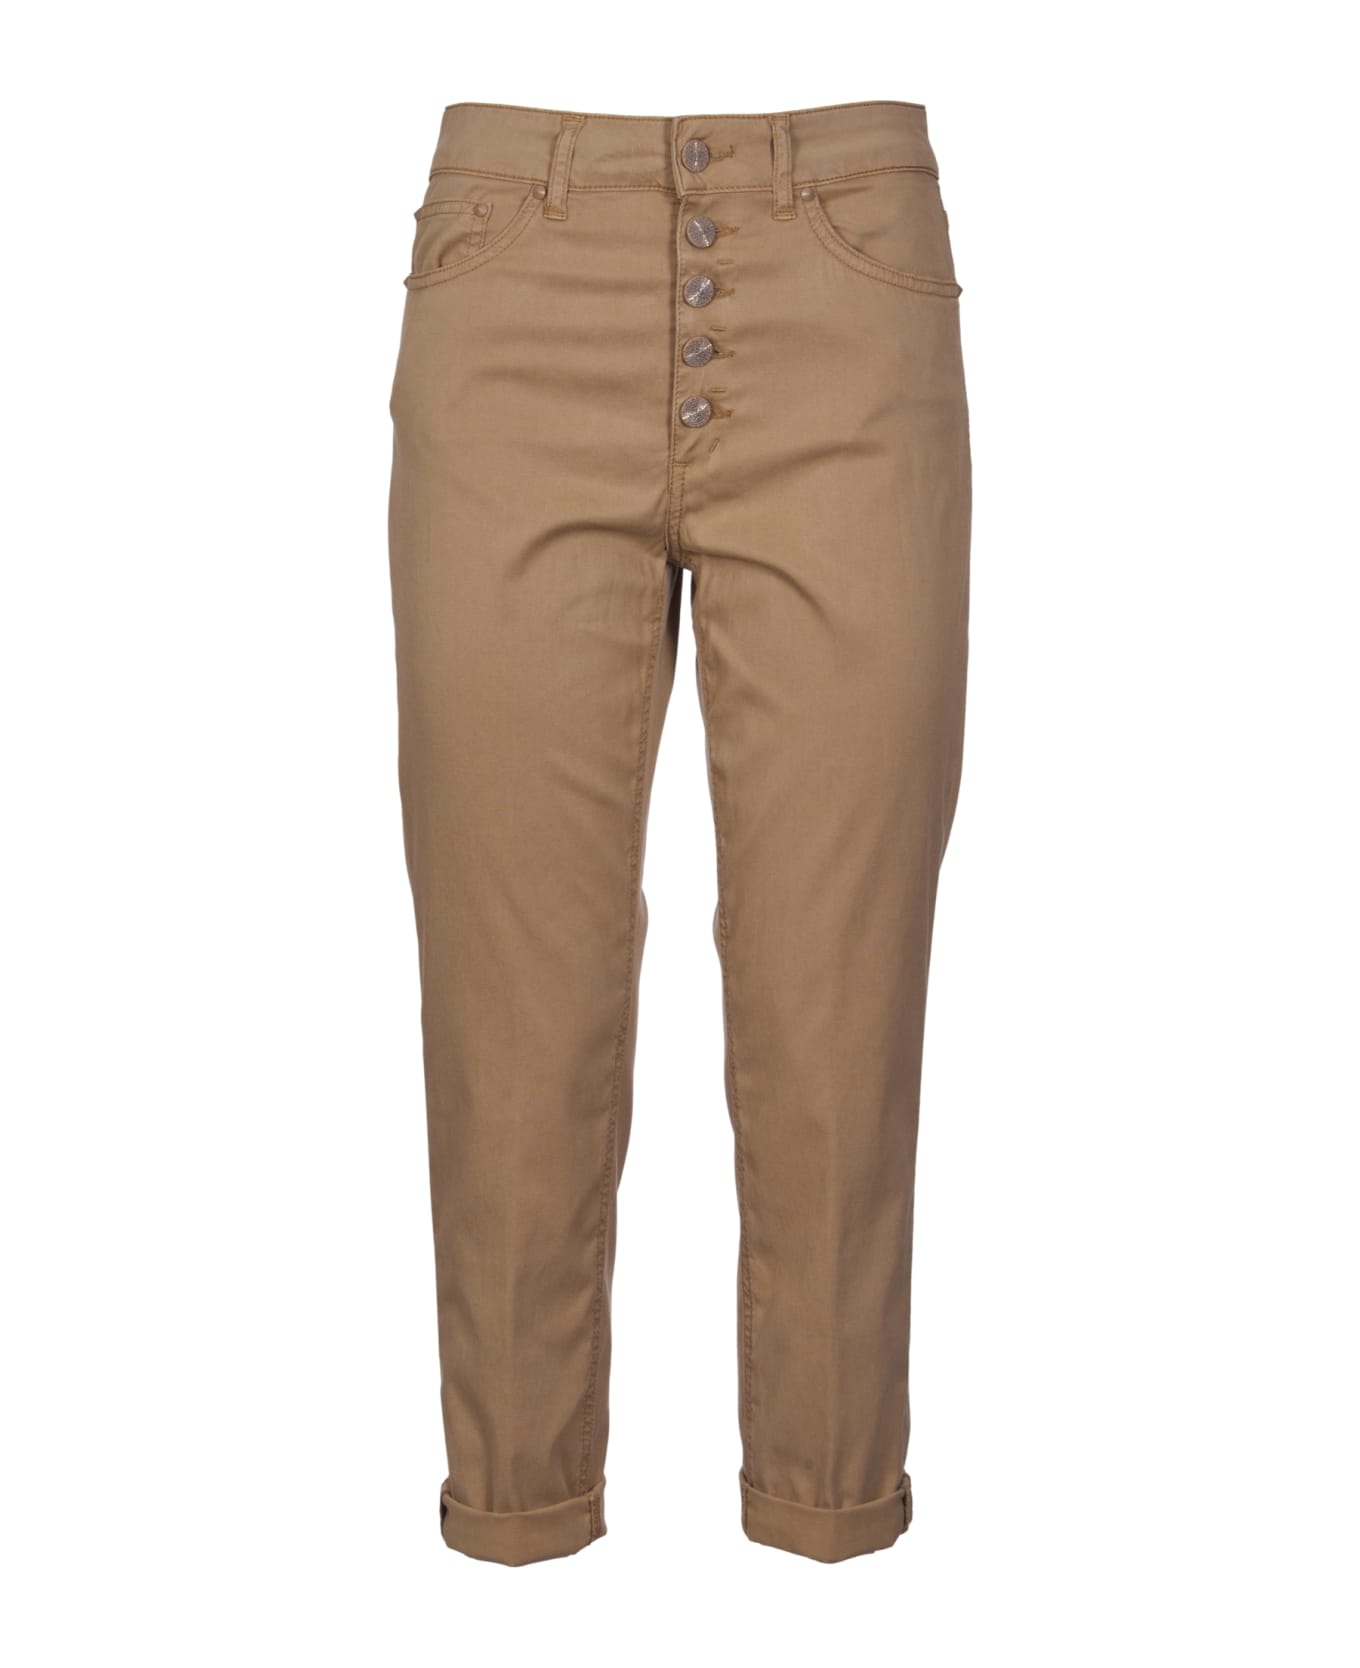 Dondup Trousers - Beige ボトムス